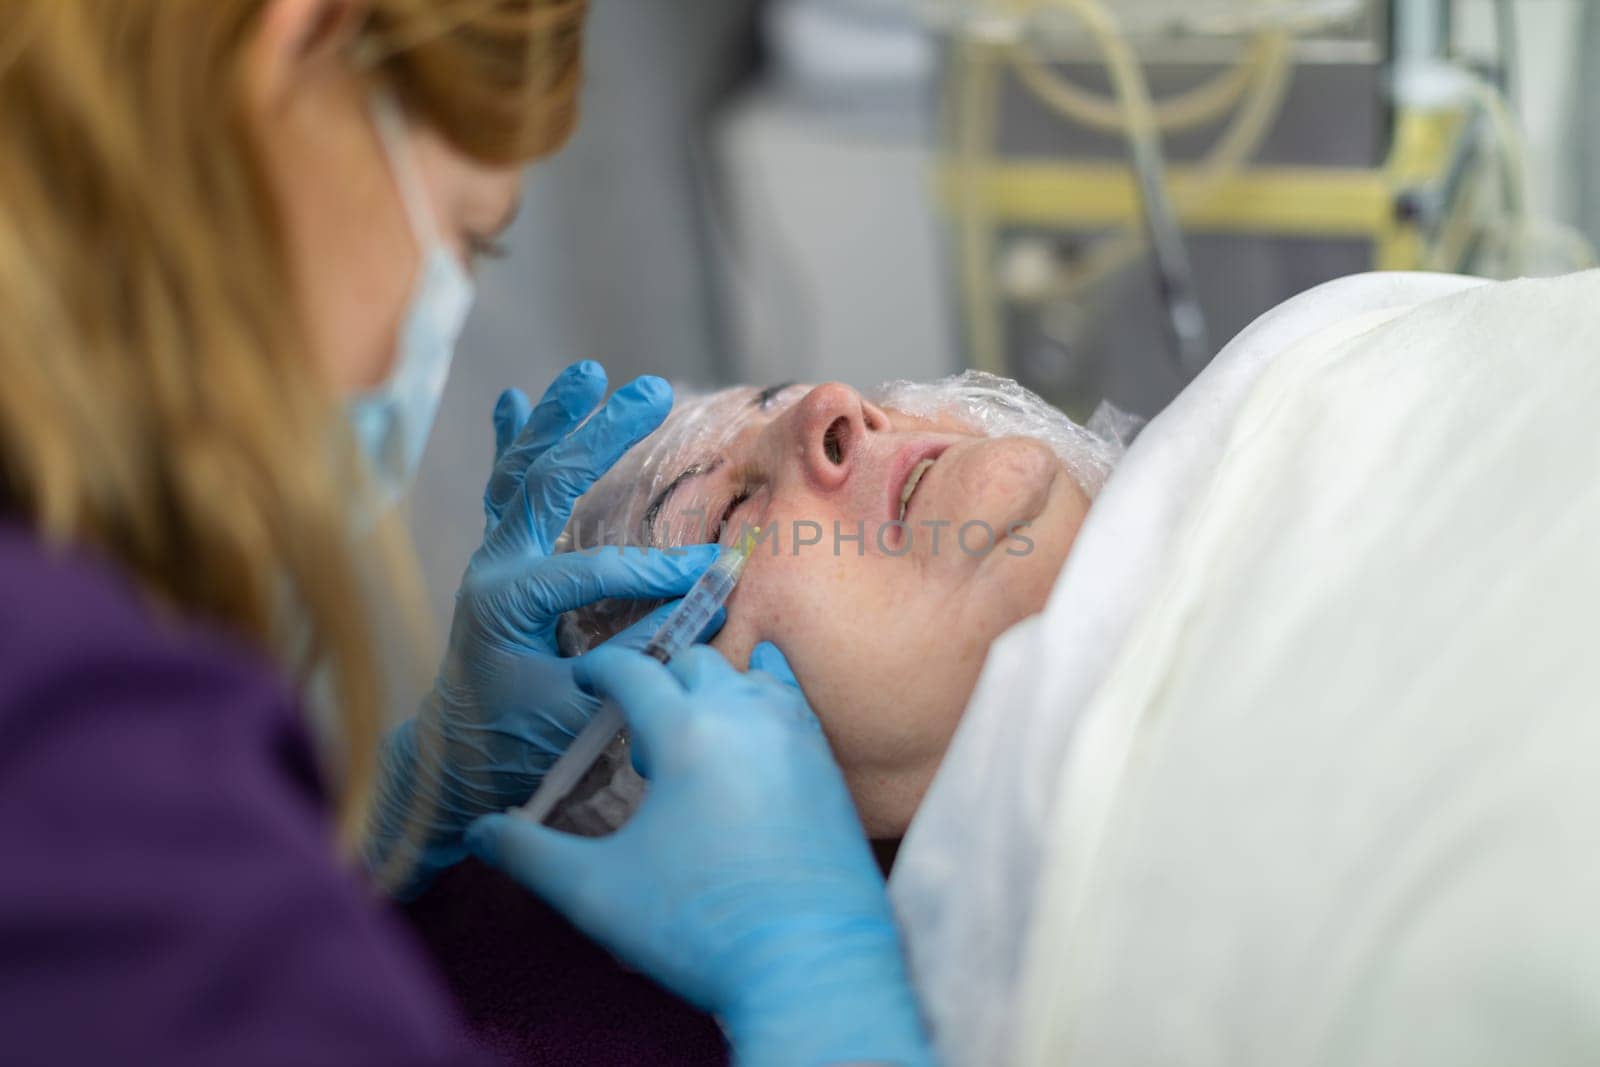 A beauty salon client is lying on a bed. She is having mesotherapy performed. The woman is receiving a series of injections into her face. She contorts her face in a grimace of pain.